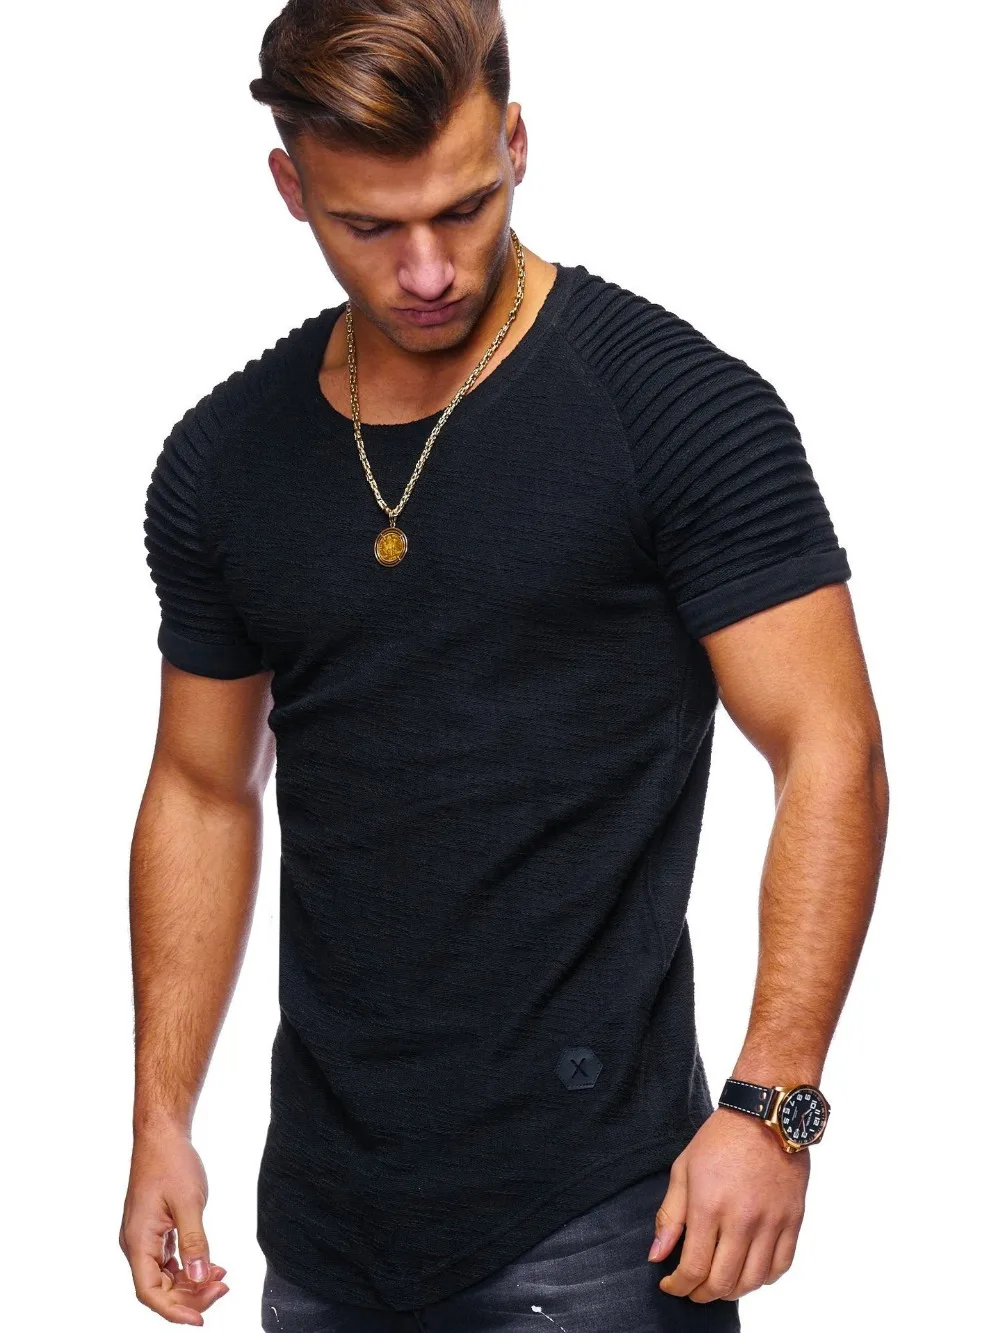 

E1107-Summer new men's T-shirts solid color slim trend casual short-sleeved fashion